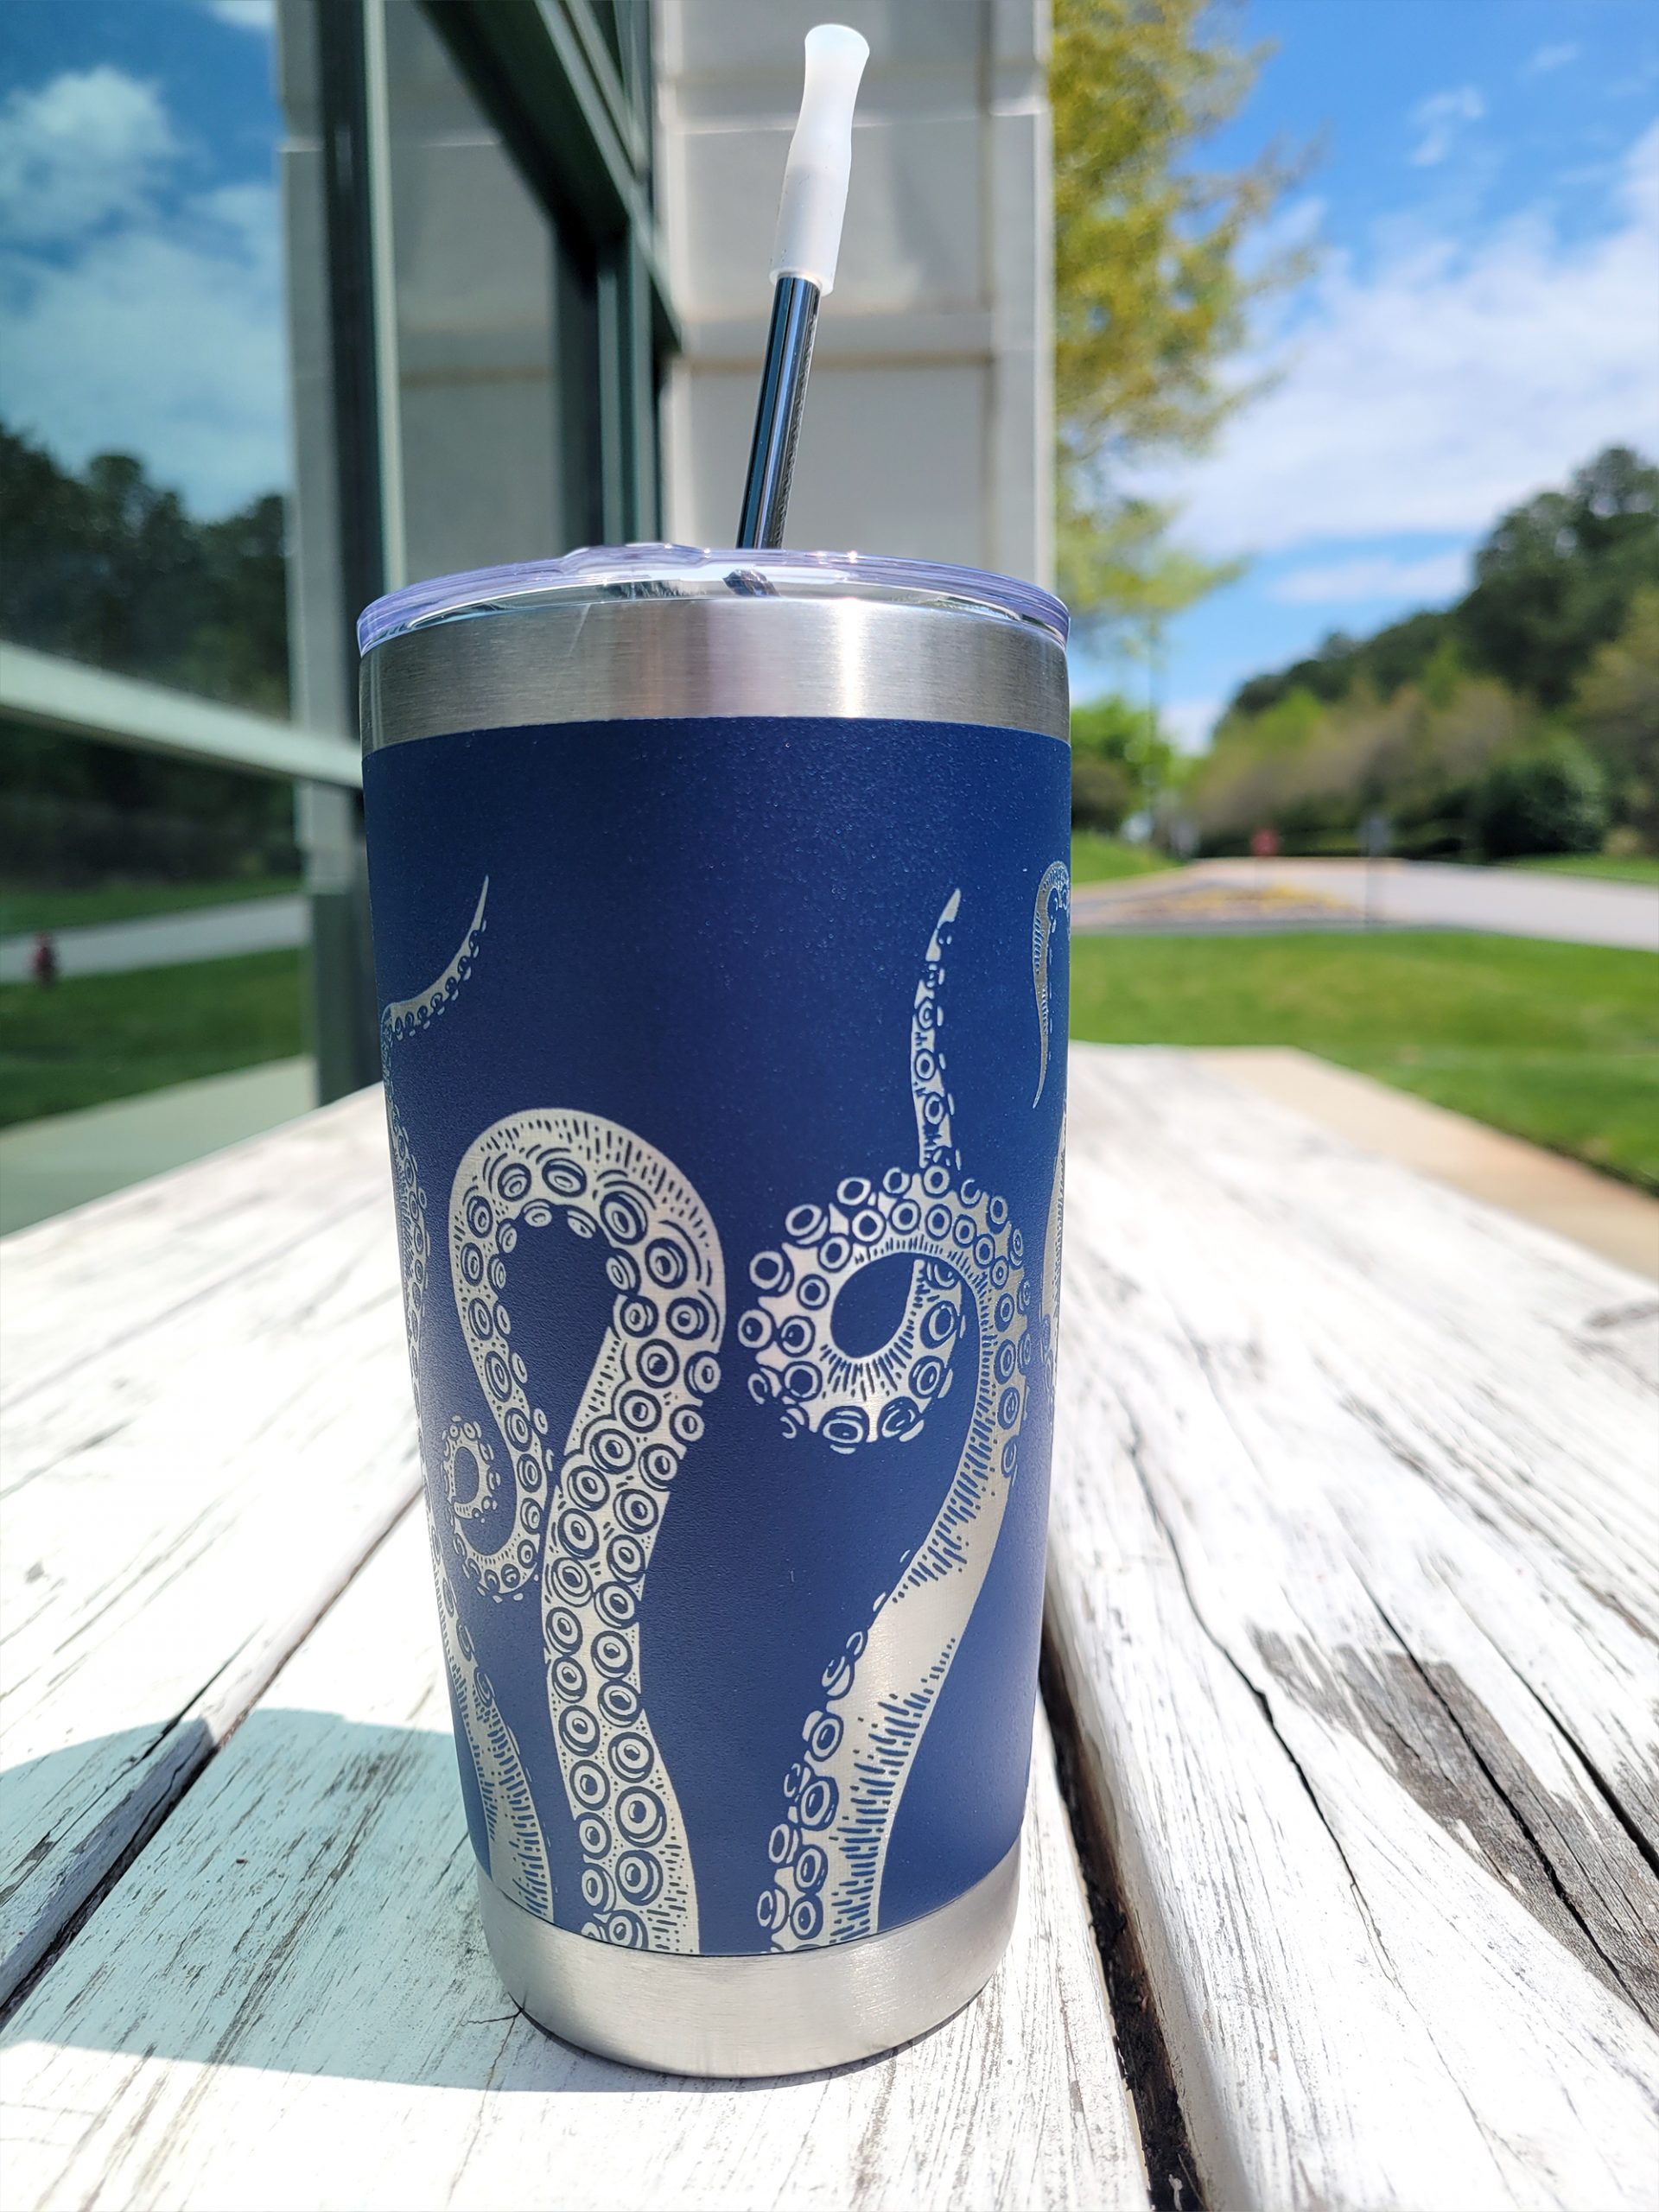 Octopus/Squid Tentacles Custom Engraved Tumbler with straw & lid- 20oz  Stainless Steel Travel Mug, Hot/Cold Drinks - Personalized Gift - TSN  Custom Metal